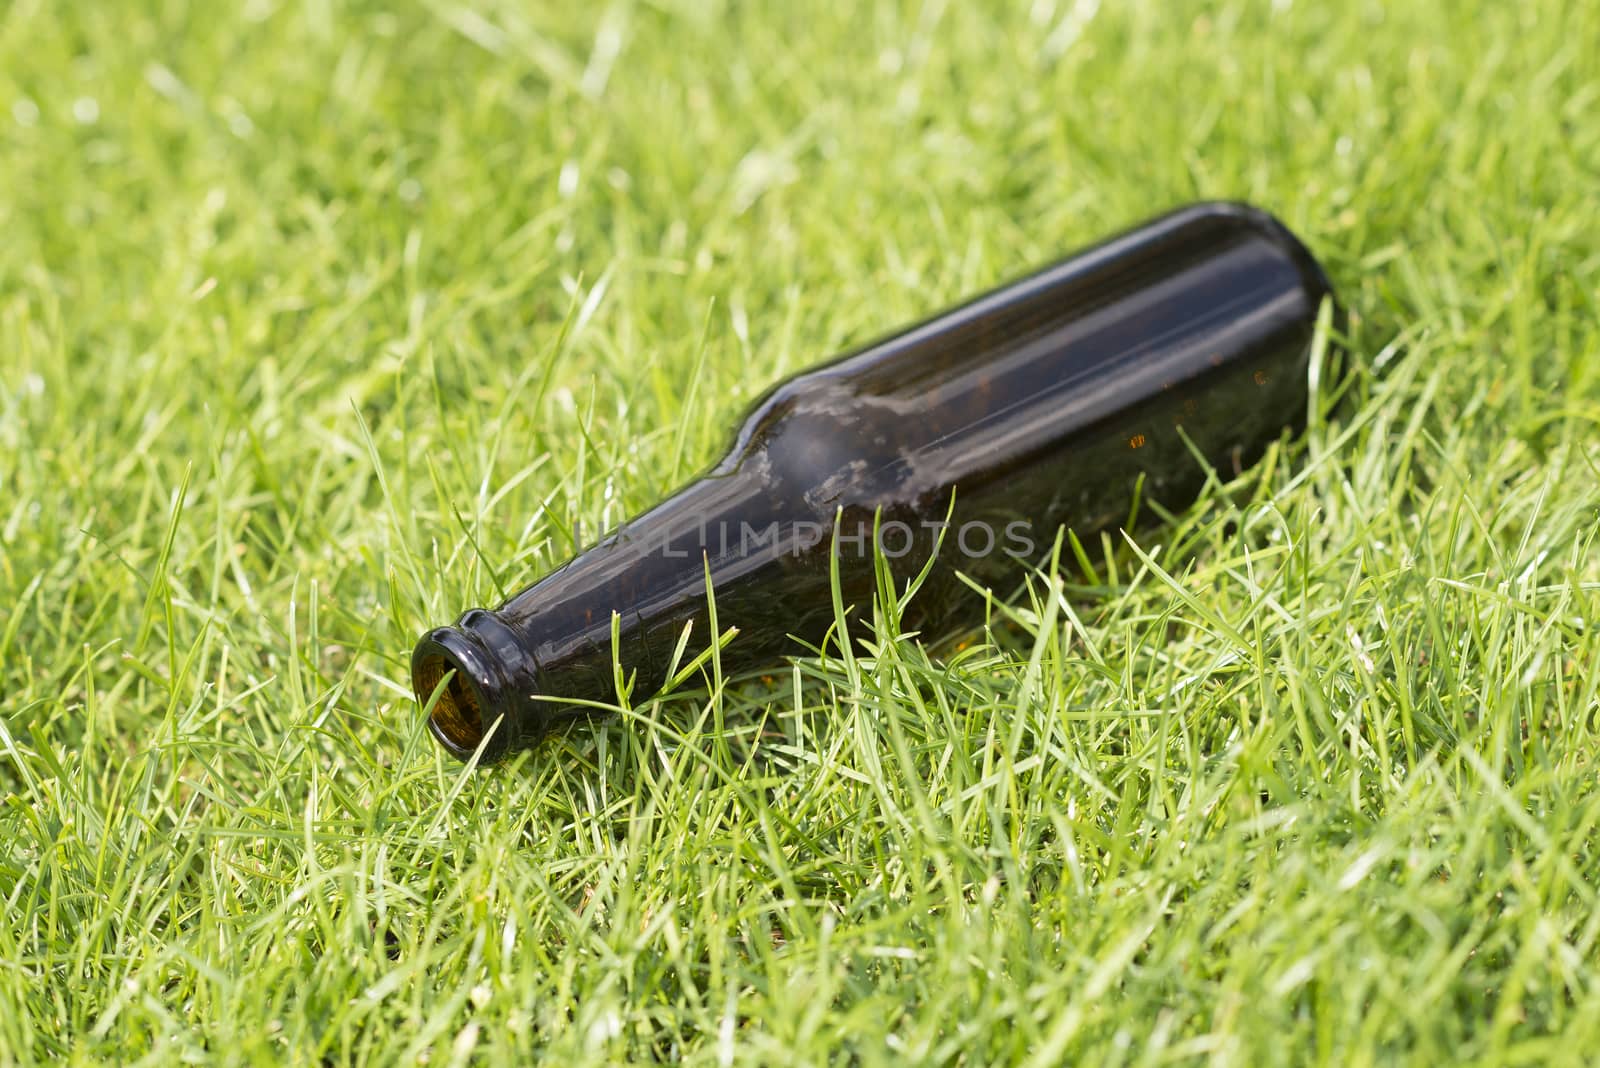 Empty beer bottle in a grass field with a vague background
